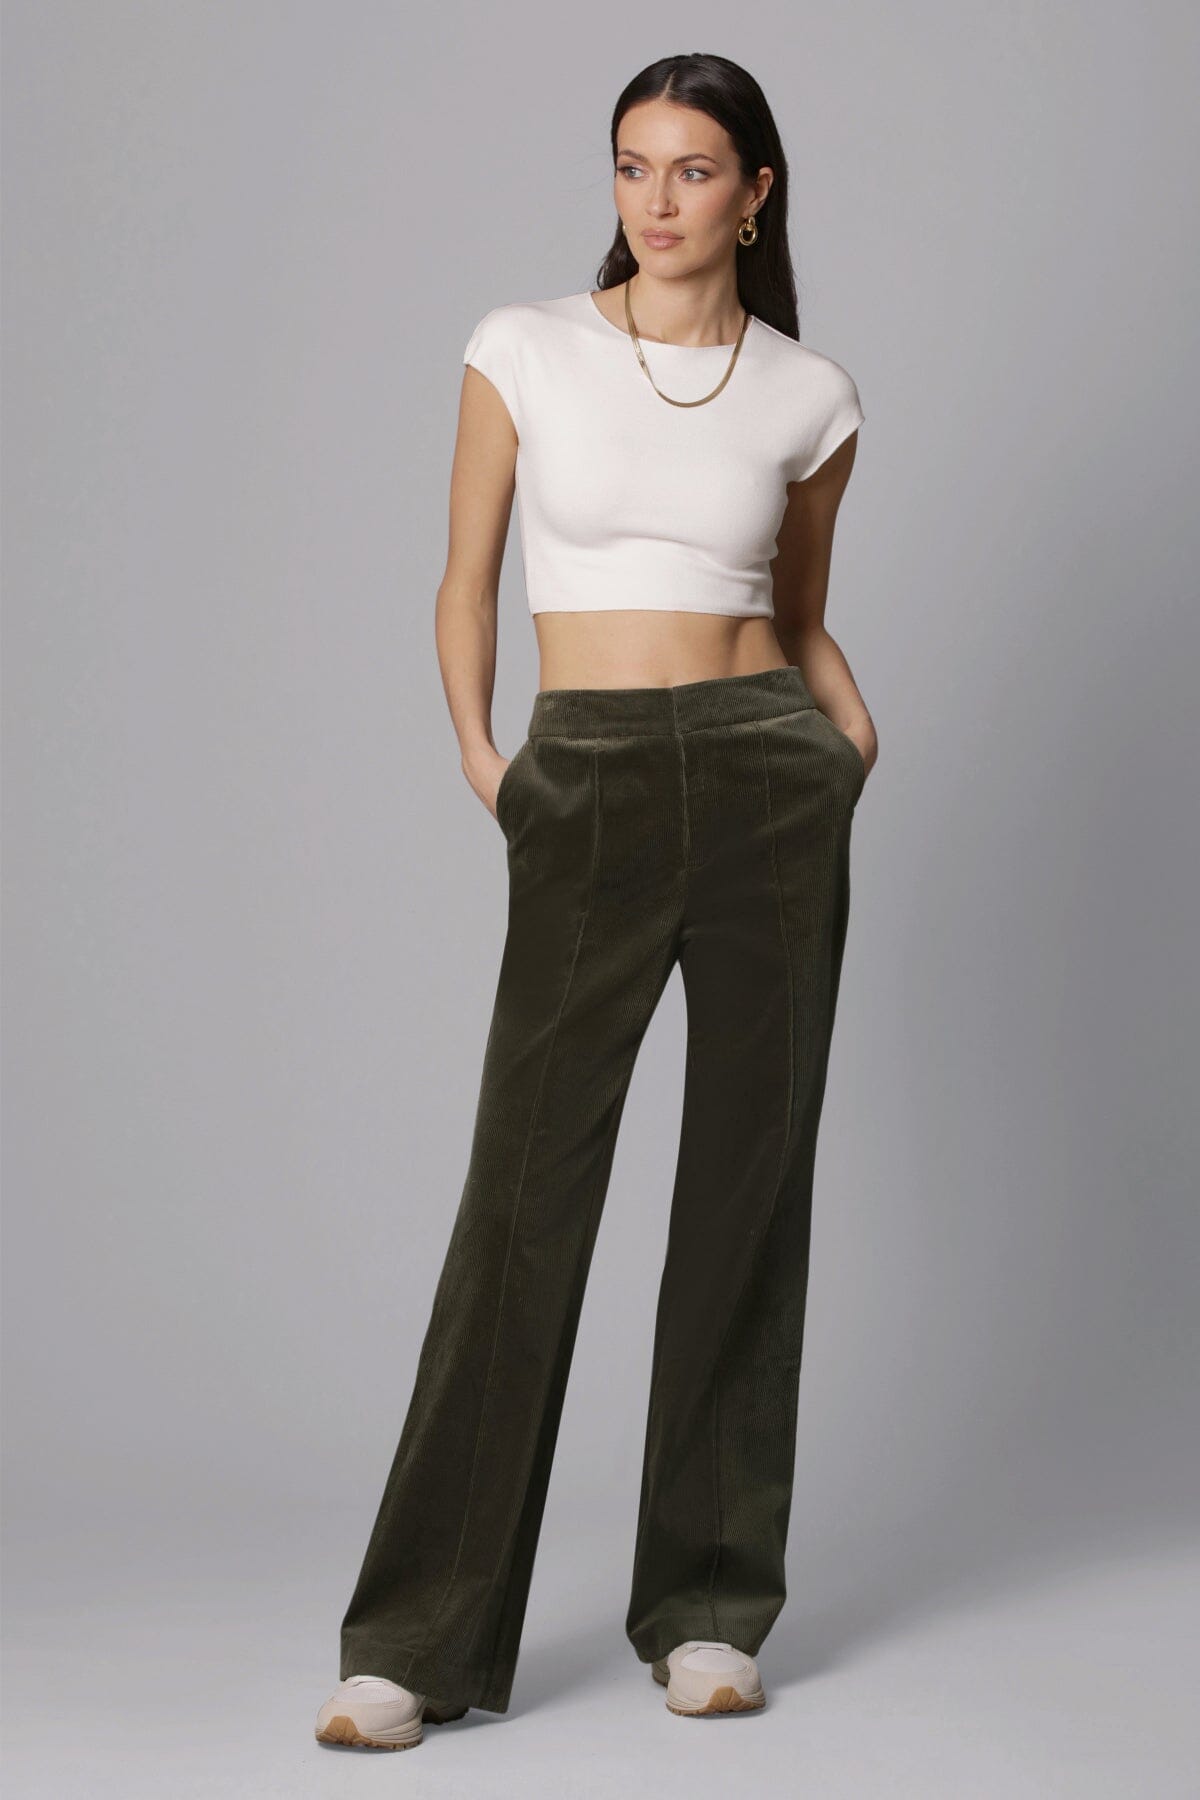 dark moss green stretch corduroy flare trouser pant - figure flattering office to date night trousers pants for women